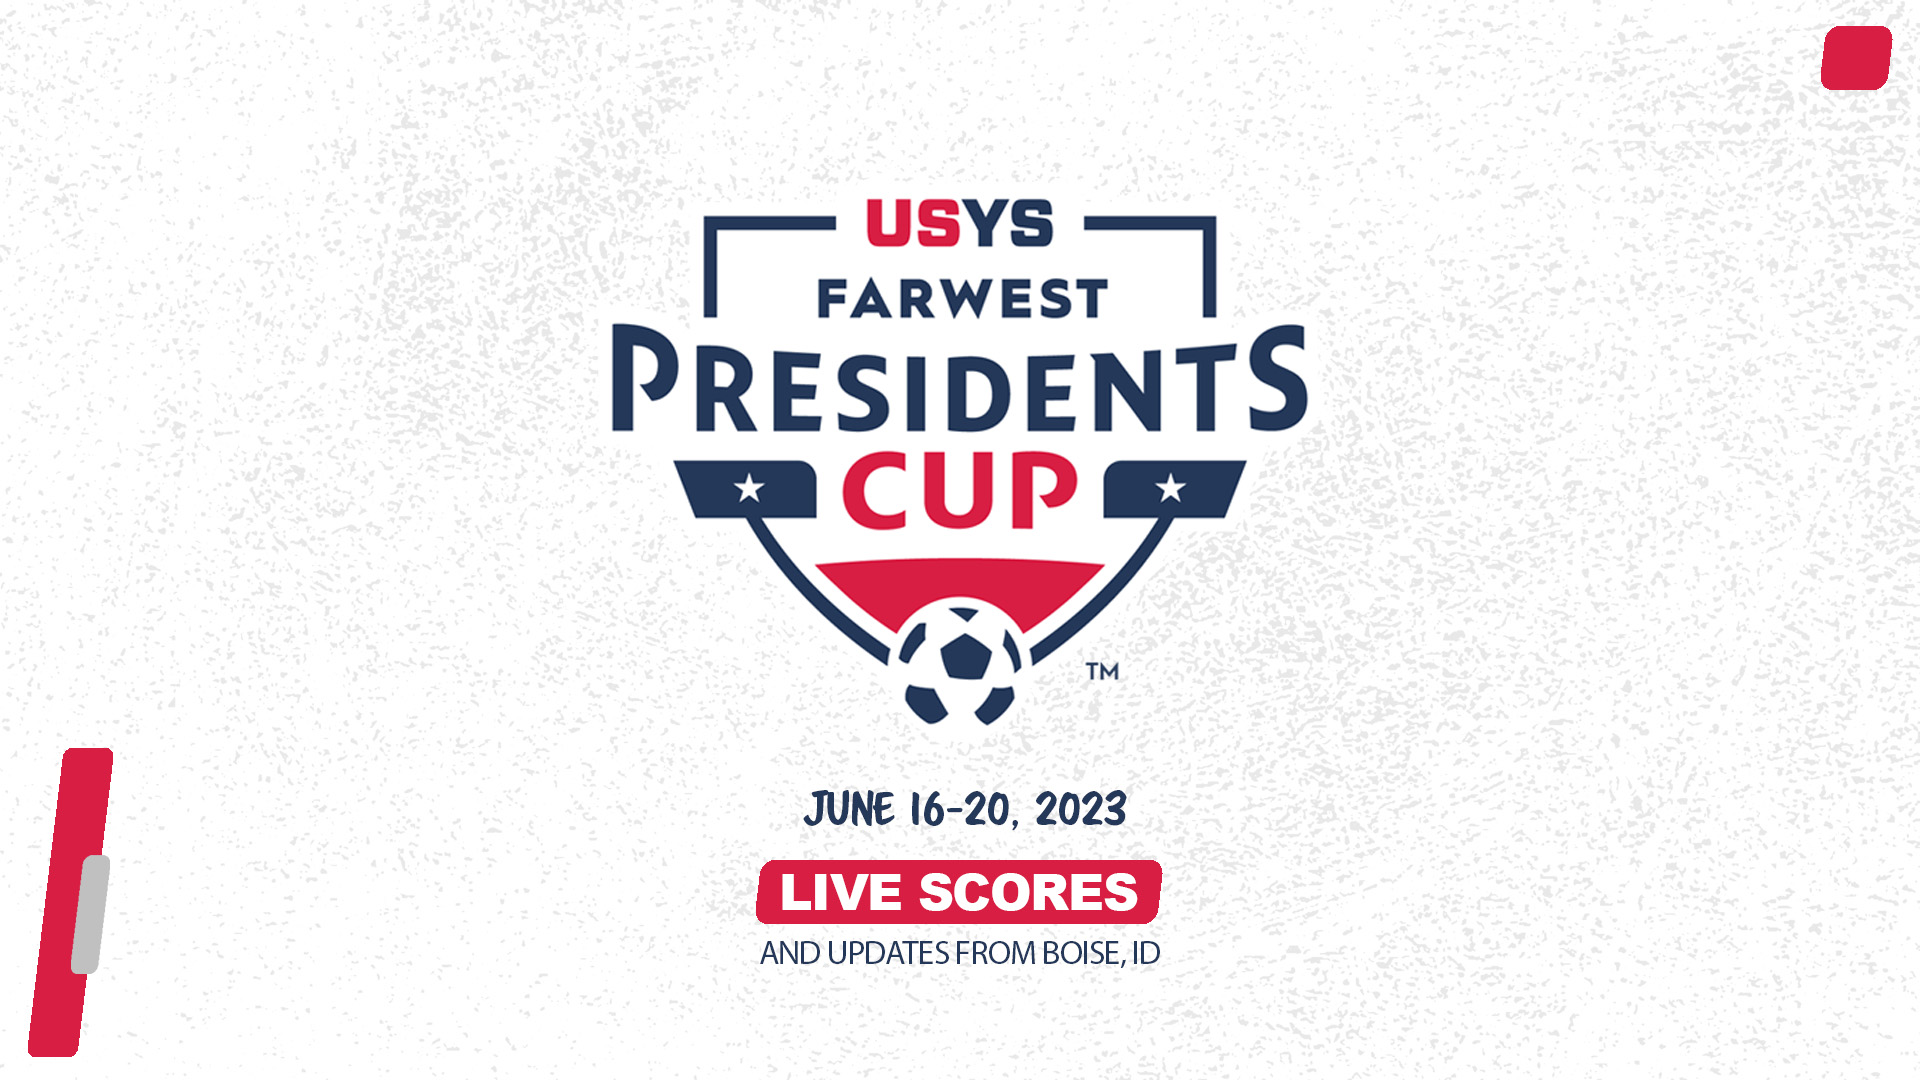 Live Scores and Updates from the 2023 USYS Far West Presidents Cup